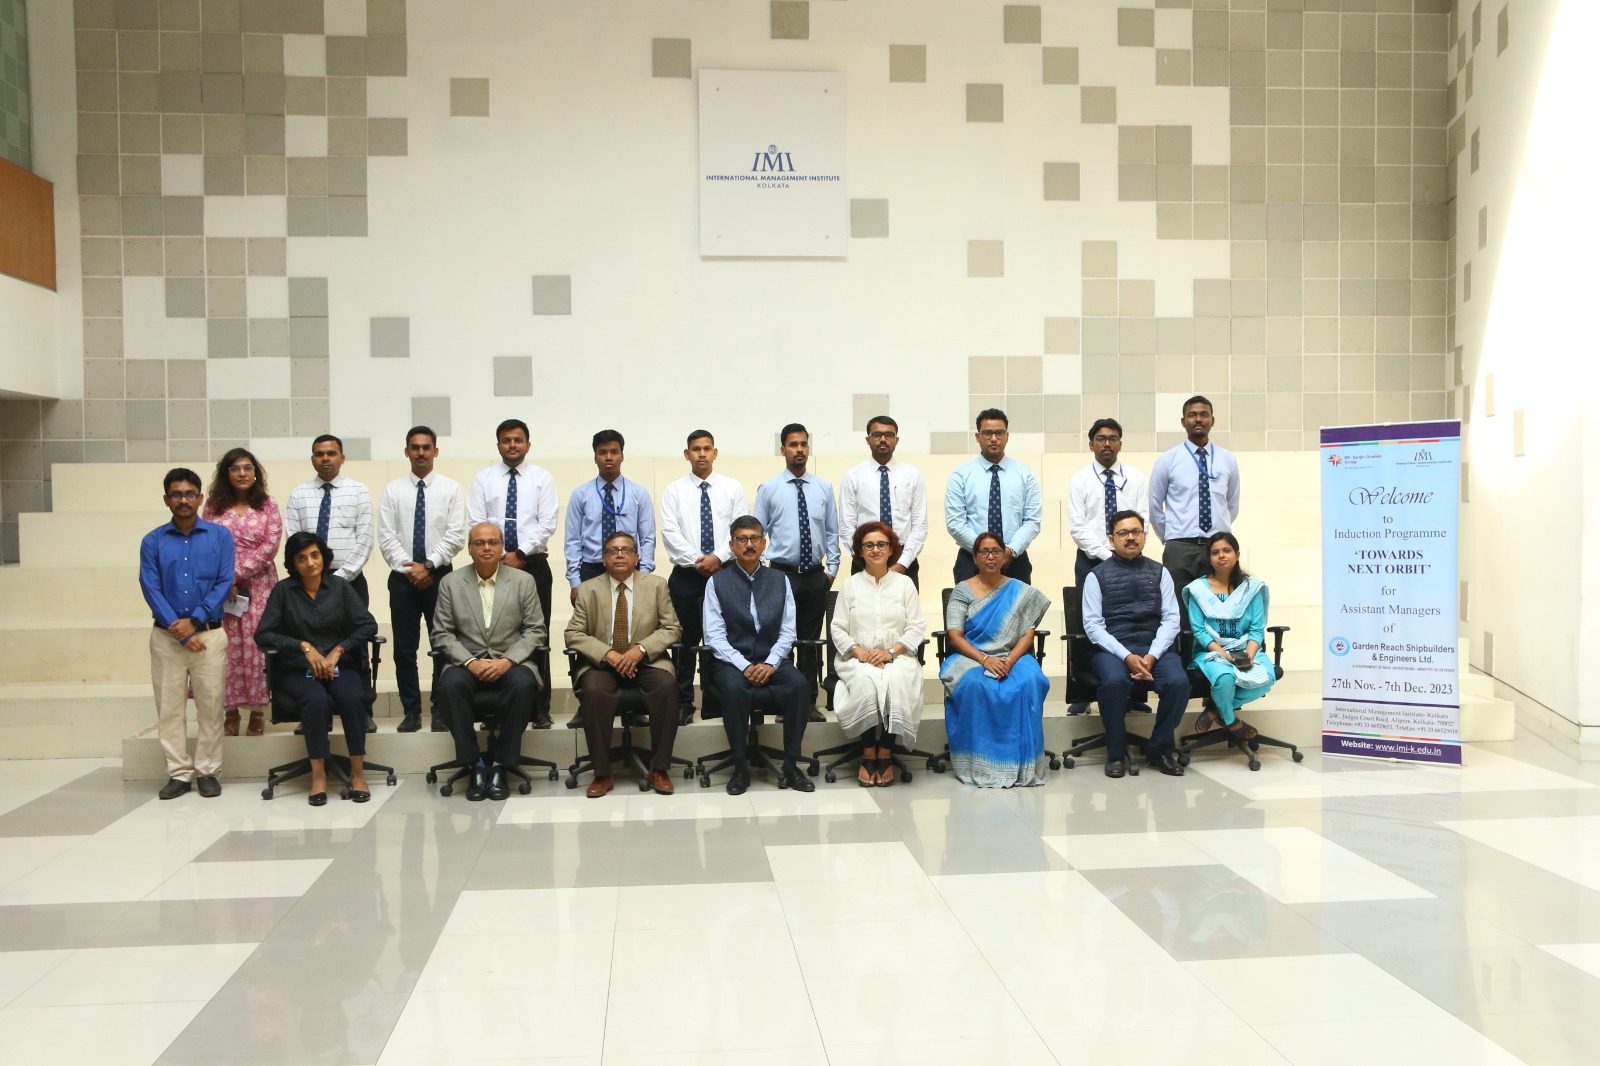 Director (Personnel) inaugurated the MDP- 'Towards Next Orbit', for newly joined AMs at IMI, Kolkata on 27 Nov 23